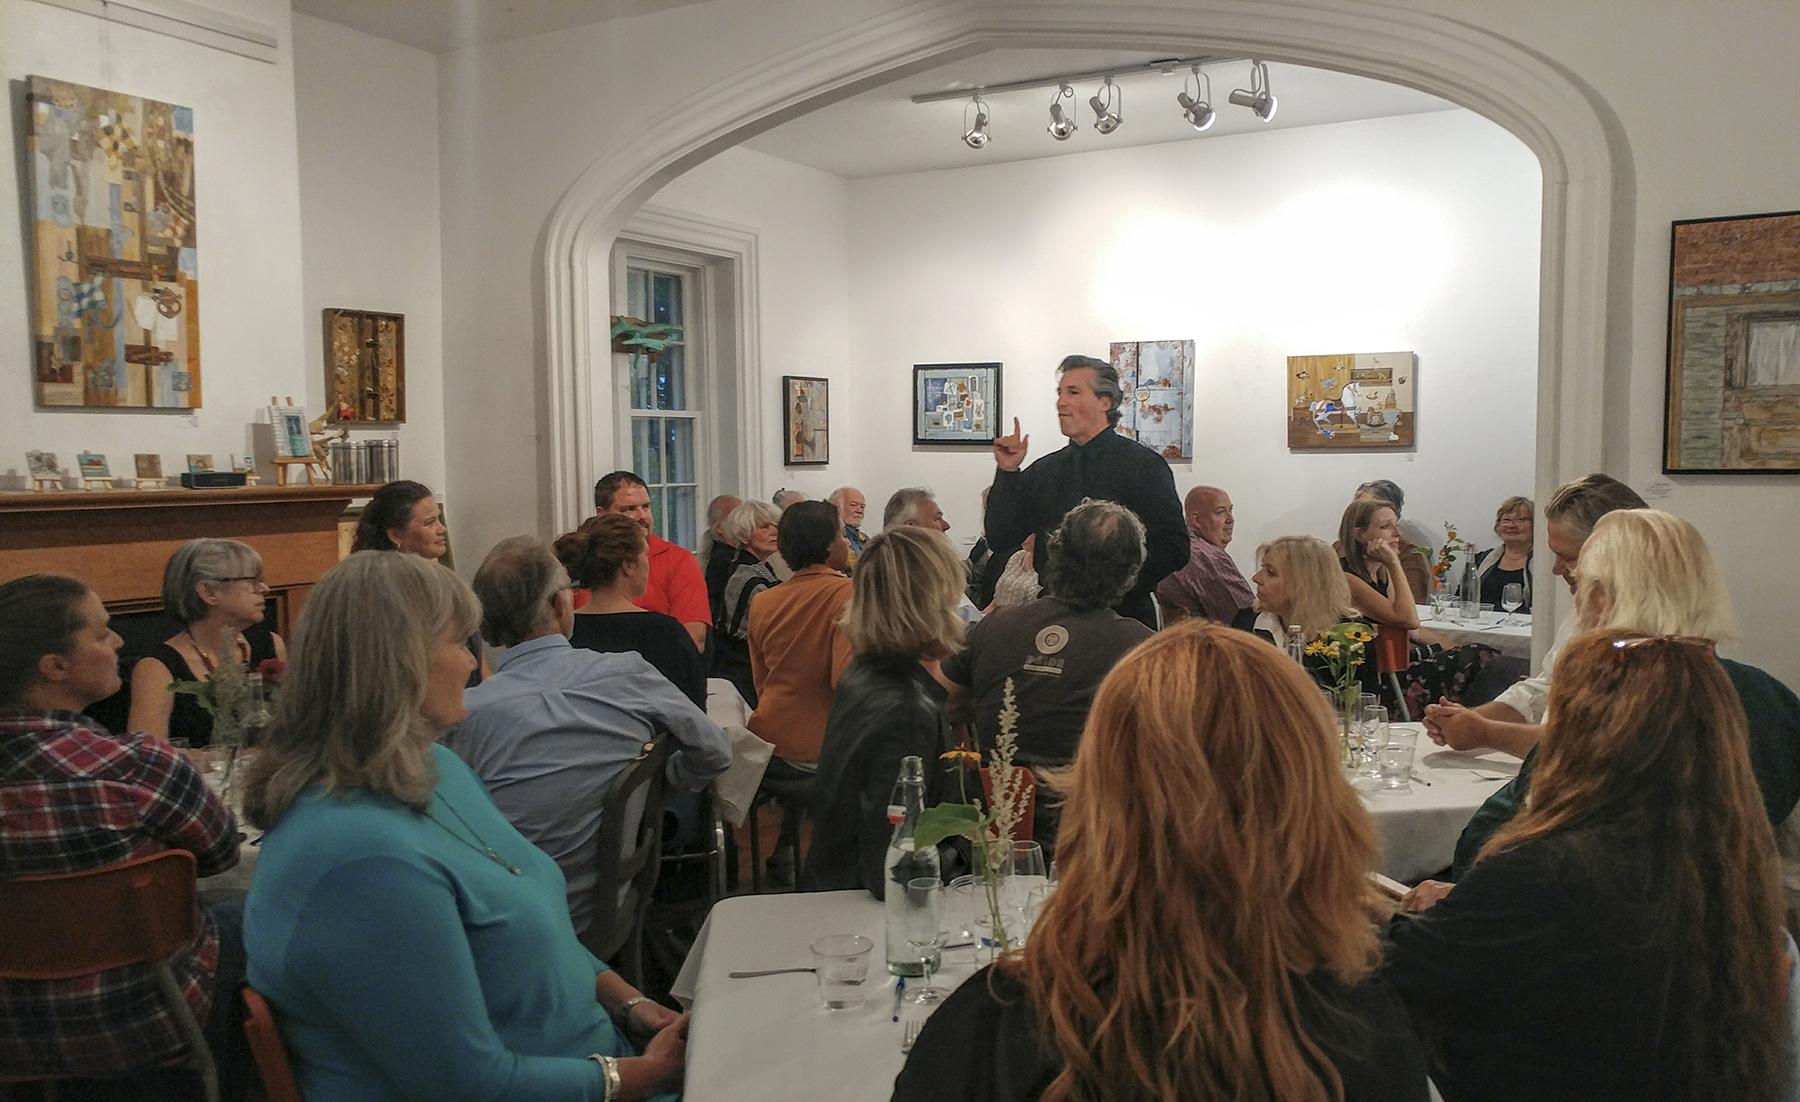 Sold-out crowd for wine-pairing event at Arbor Gallery